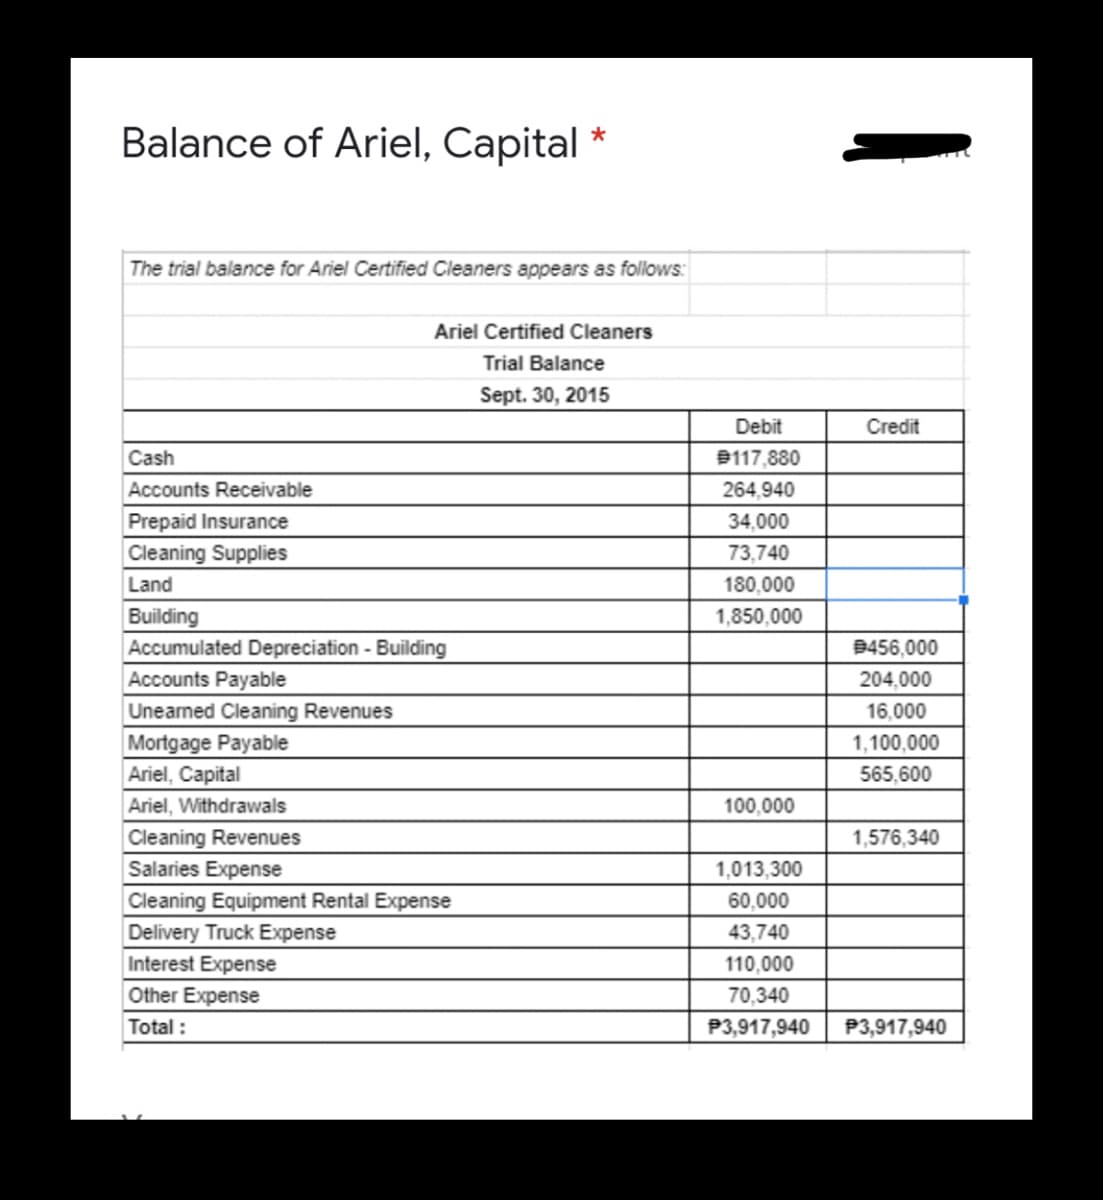 Balance of Ariel, Capital
The trial balance for Ariel Certified Cleaners appears as follows:
Ariel Certified Cleaners
Trial Balance
Sept. 30, 2015
Debit
Credit
Cash
9117,880
Accounts Receivable
264,940
Prepaid Insurance
34,000
Cleaning Supplies
73,740
Land
180,000
Building
Accumulated Depreciation - Building
1,850,000
9456,000
Accounts Payable
204,000
Uneamed Cleaning Revenues
16,000
Mortgage Payable
Ariel, Capital
1,100,000
565,600
Ariel, Withdrawals
100,000
Cleaning Revenues
1,576,340
Salaries Expense
1,013,300
Cleaning Equipment Rental Expense
60,000
Delivery Truck Expense
43,740
Interest Expense
110,000
Other Expense
70,340
Total :
P3,917,940
P3,917,940
